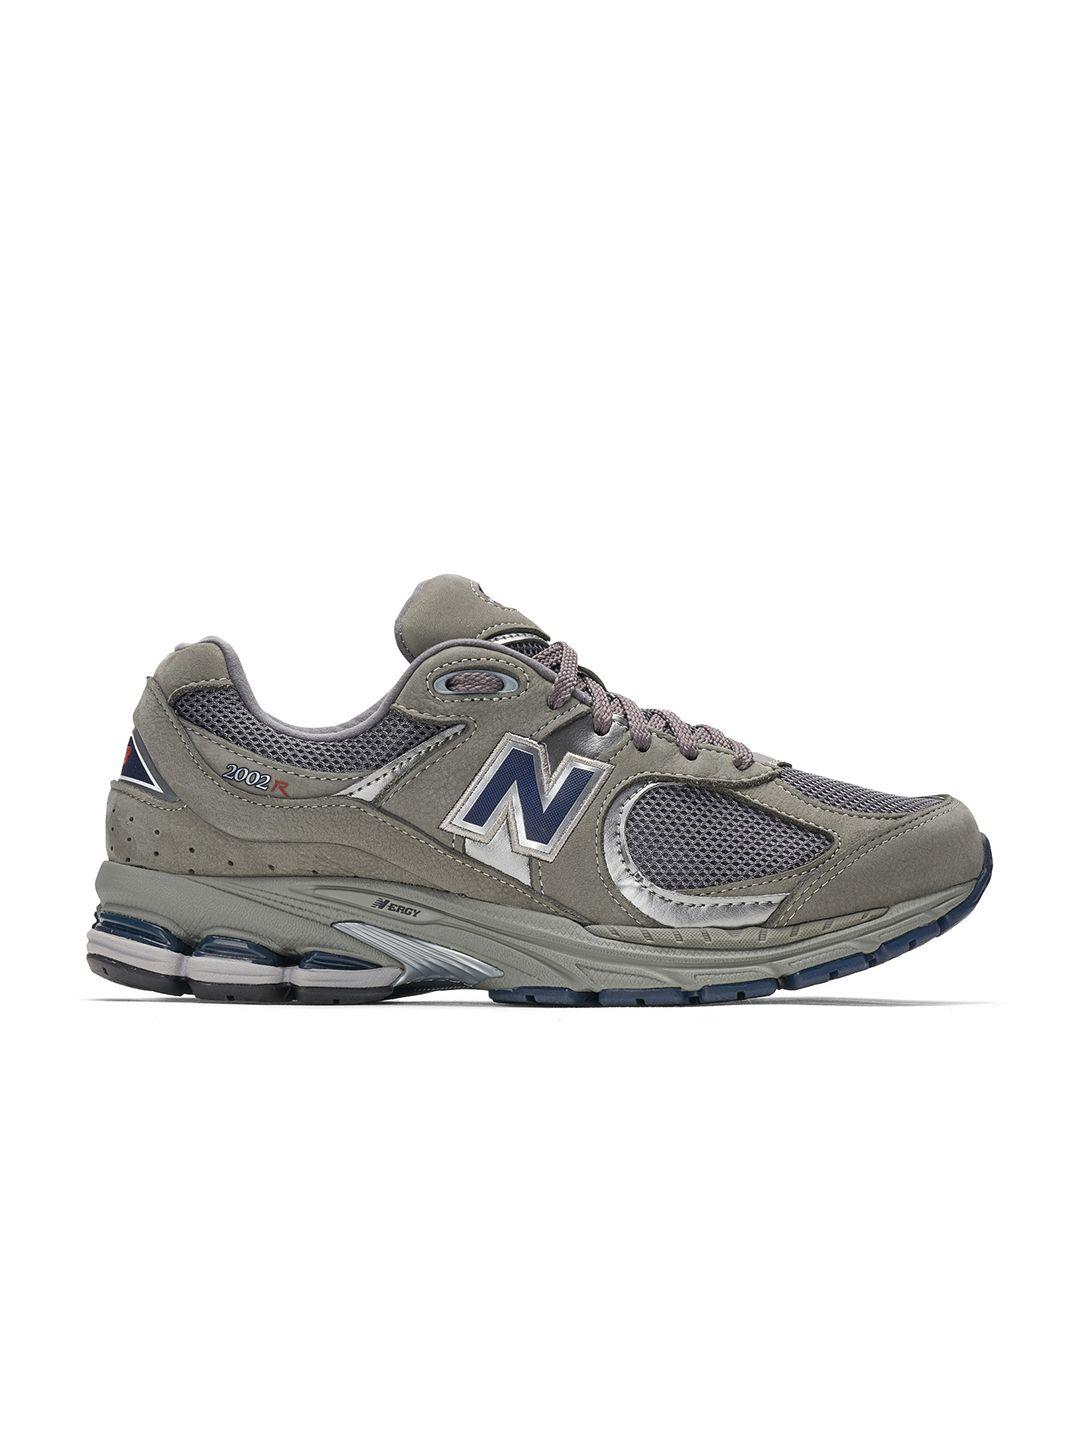 new balance men woven design training or gym shoes